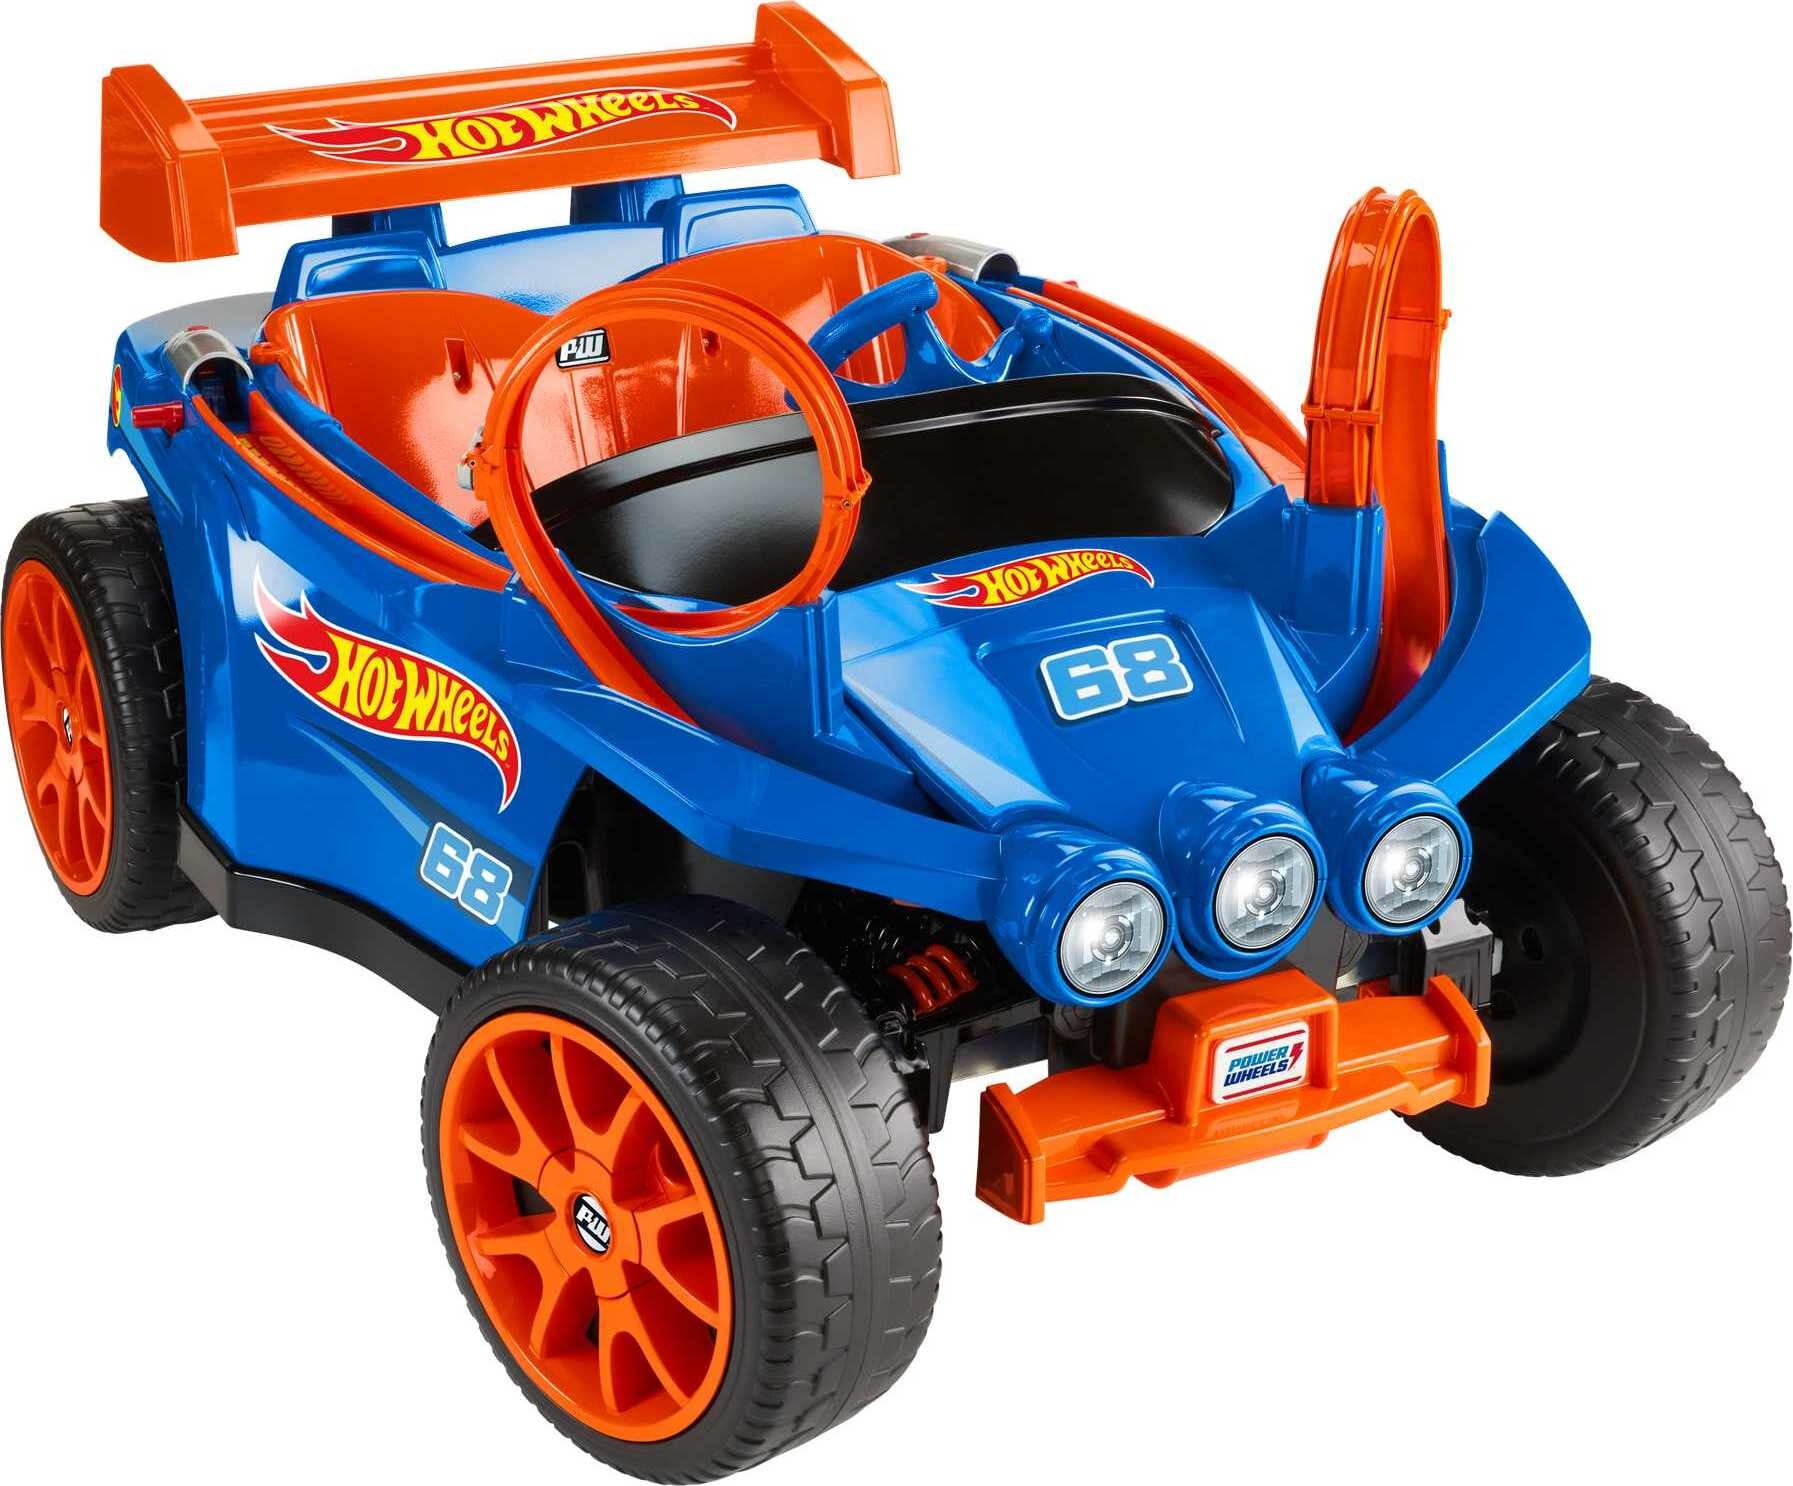 Hotwheels Hot Wheels Lights & Sounds 68 Blue Radio Remote Control Car Ages 3 for sale online 